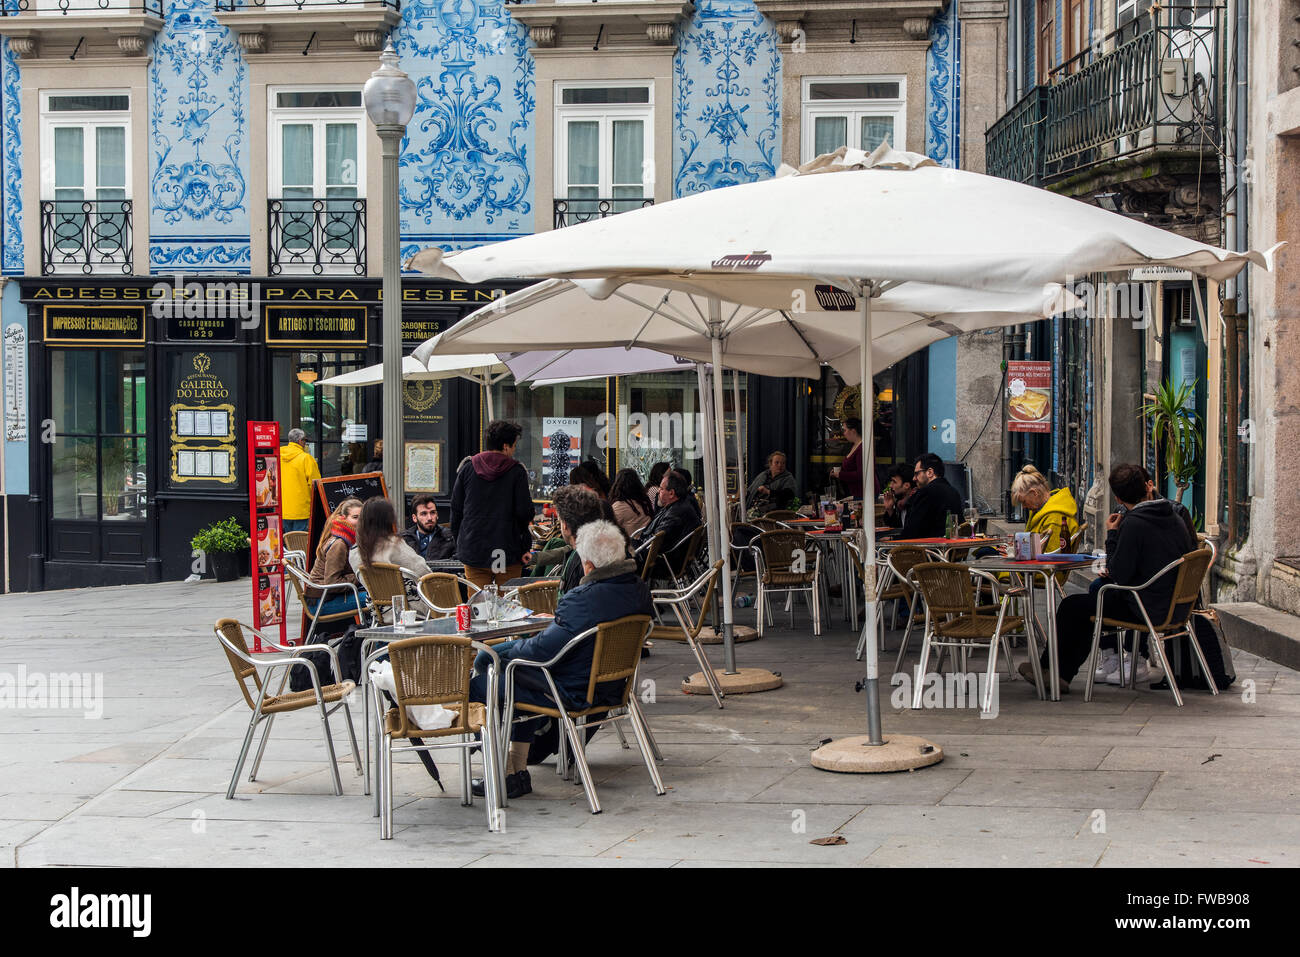 Outdoor cafe in a square of Ribeira district, Porto, Portugal Stock Photo